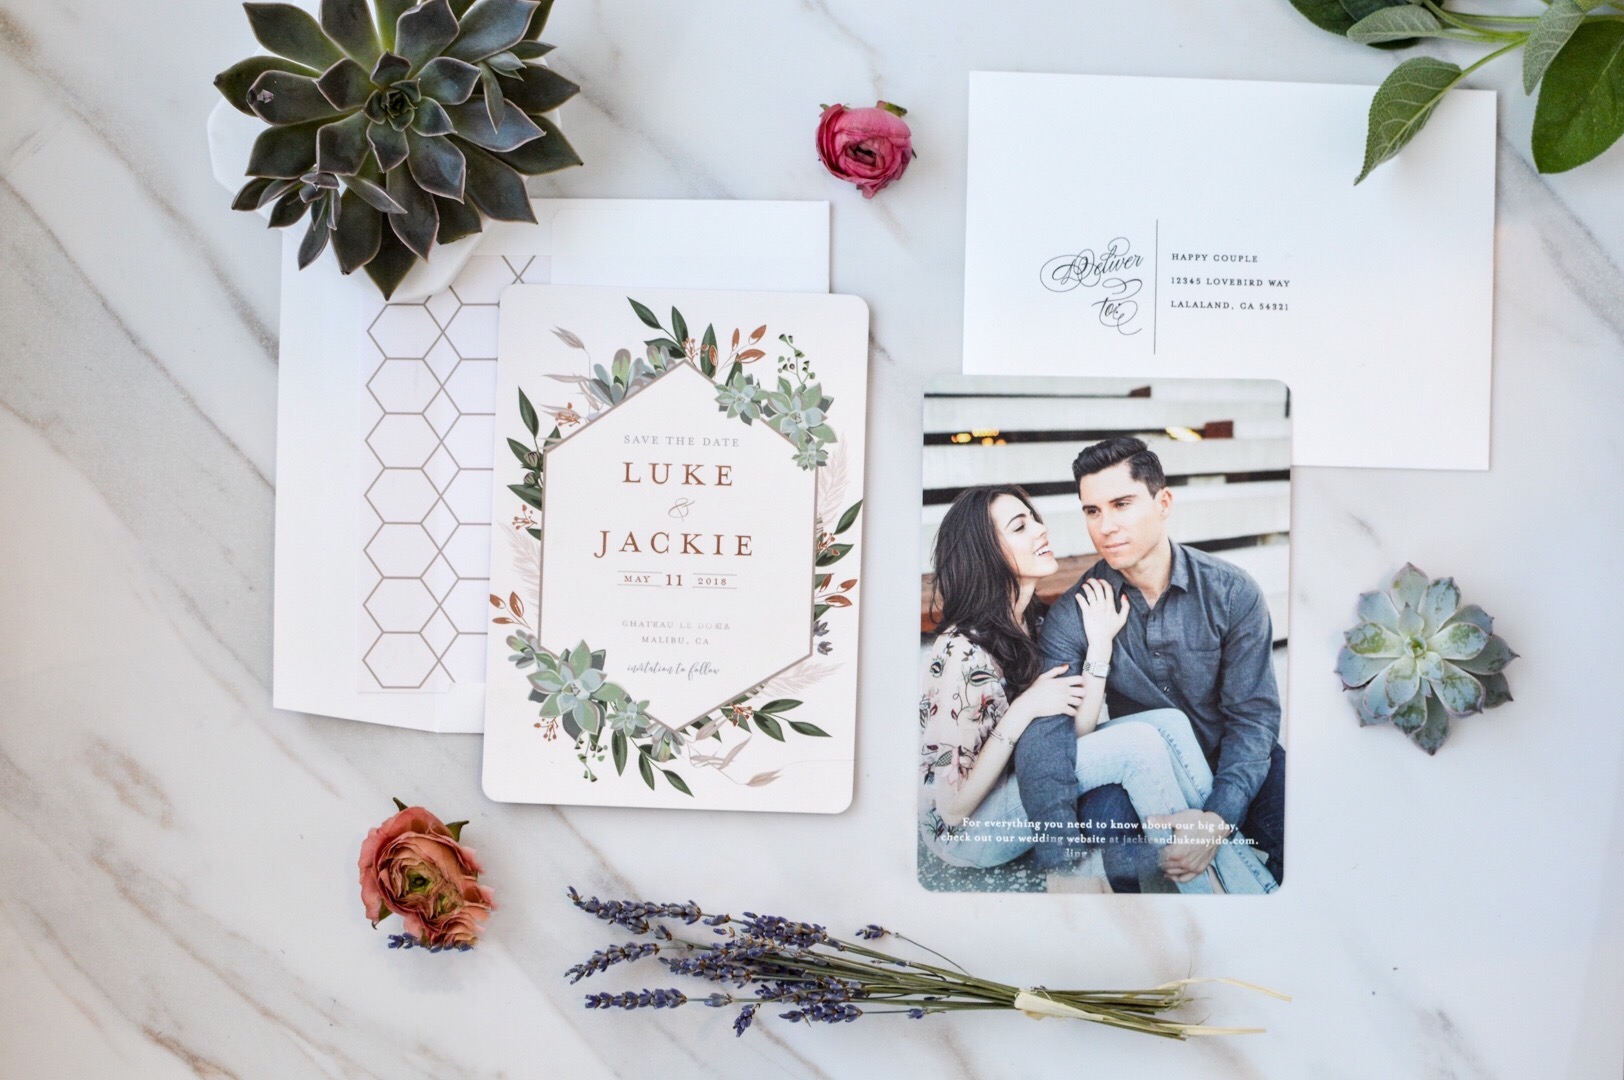 Save the date wedding invitation from Minted.